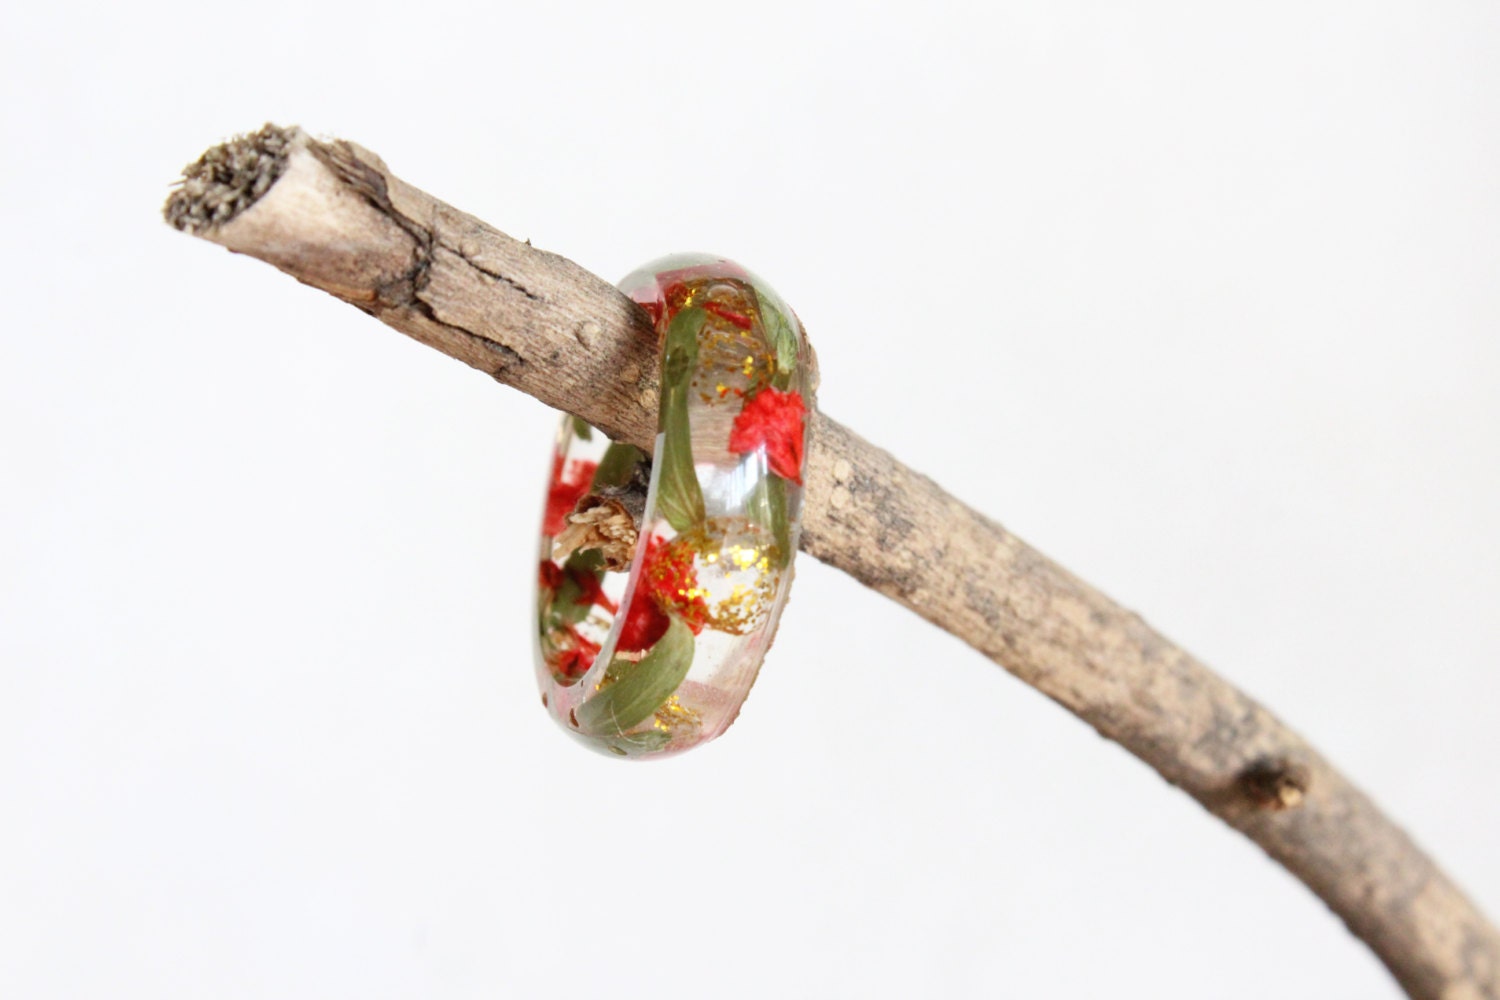 Real Babys Breath and Fern Ring, Resin Ring, Red Ring, Resin Jewelry, Nature Jewelry, Flower Jewelry, Pressed Flower Ring, Christmas Jewelry